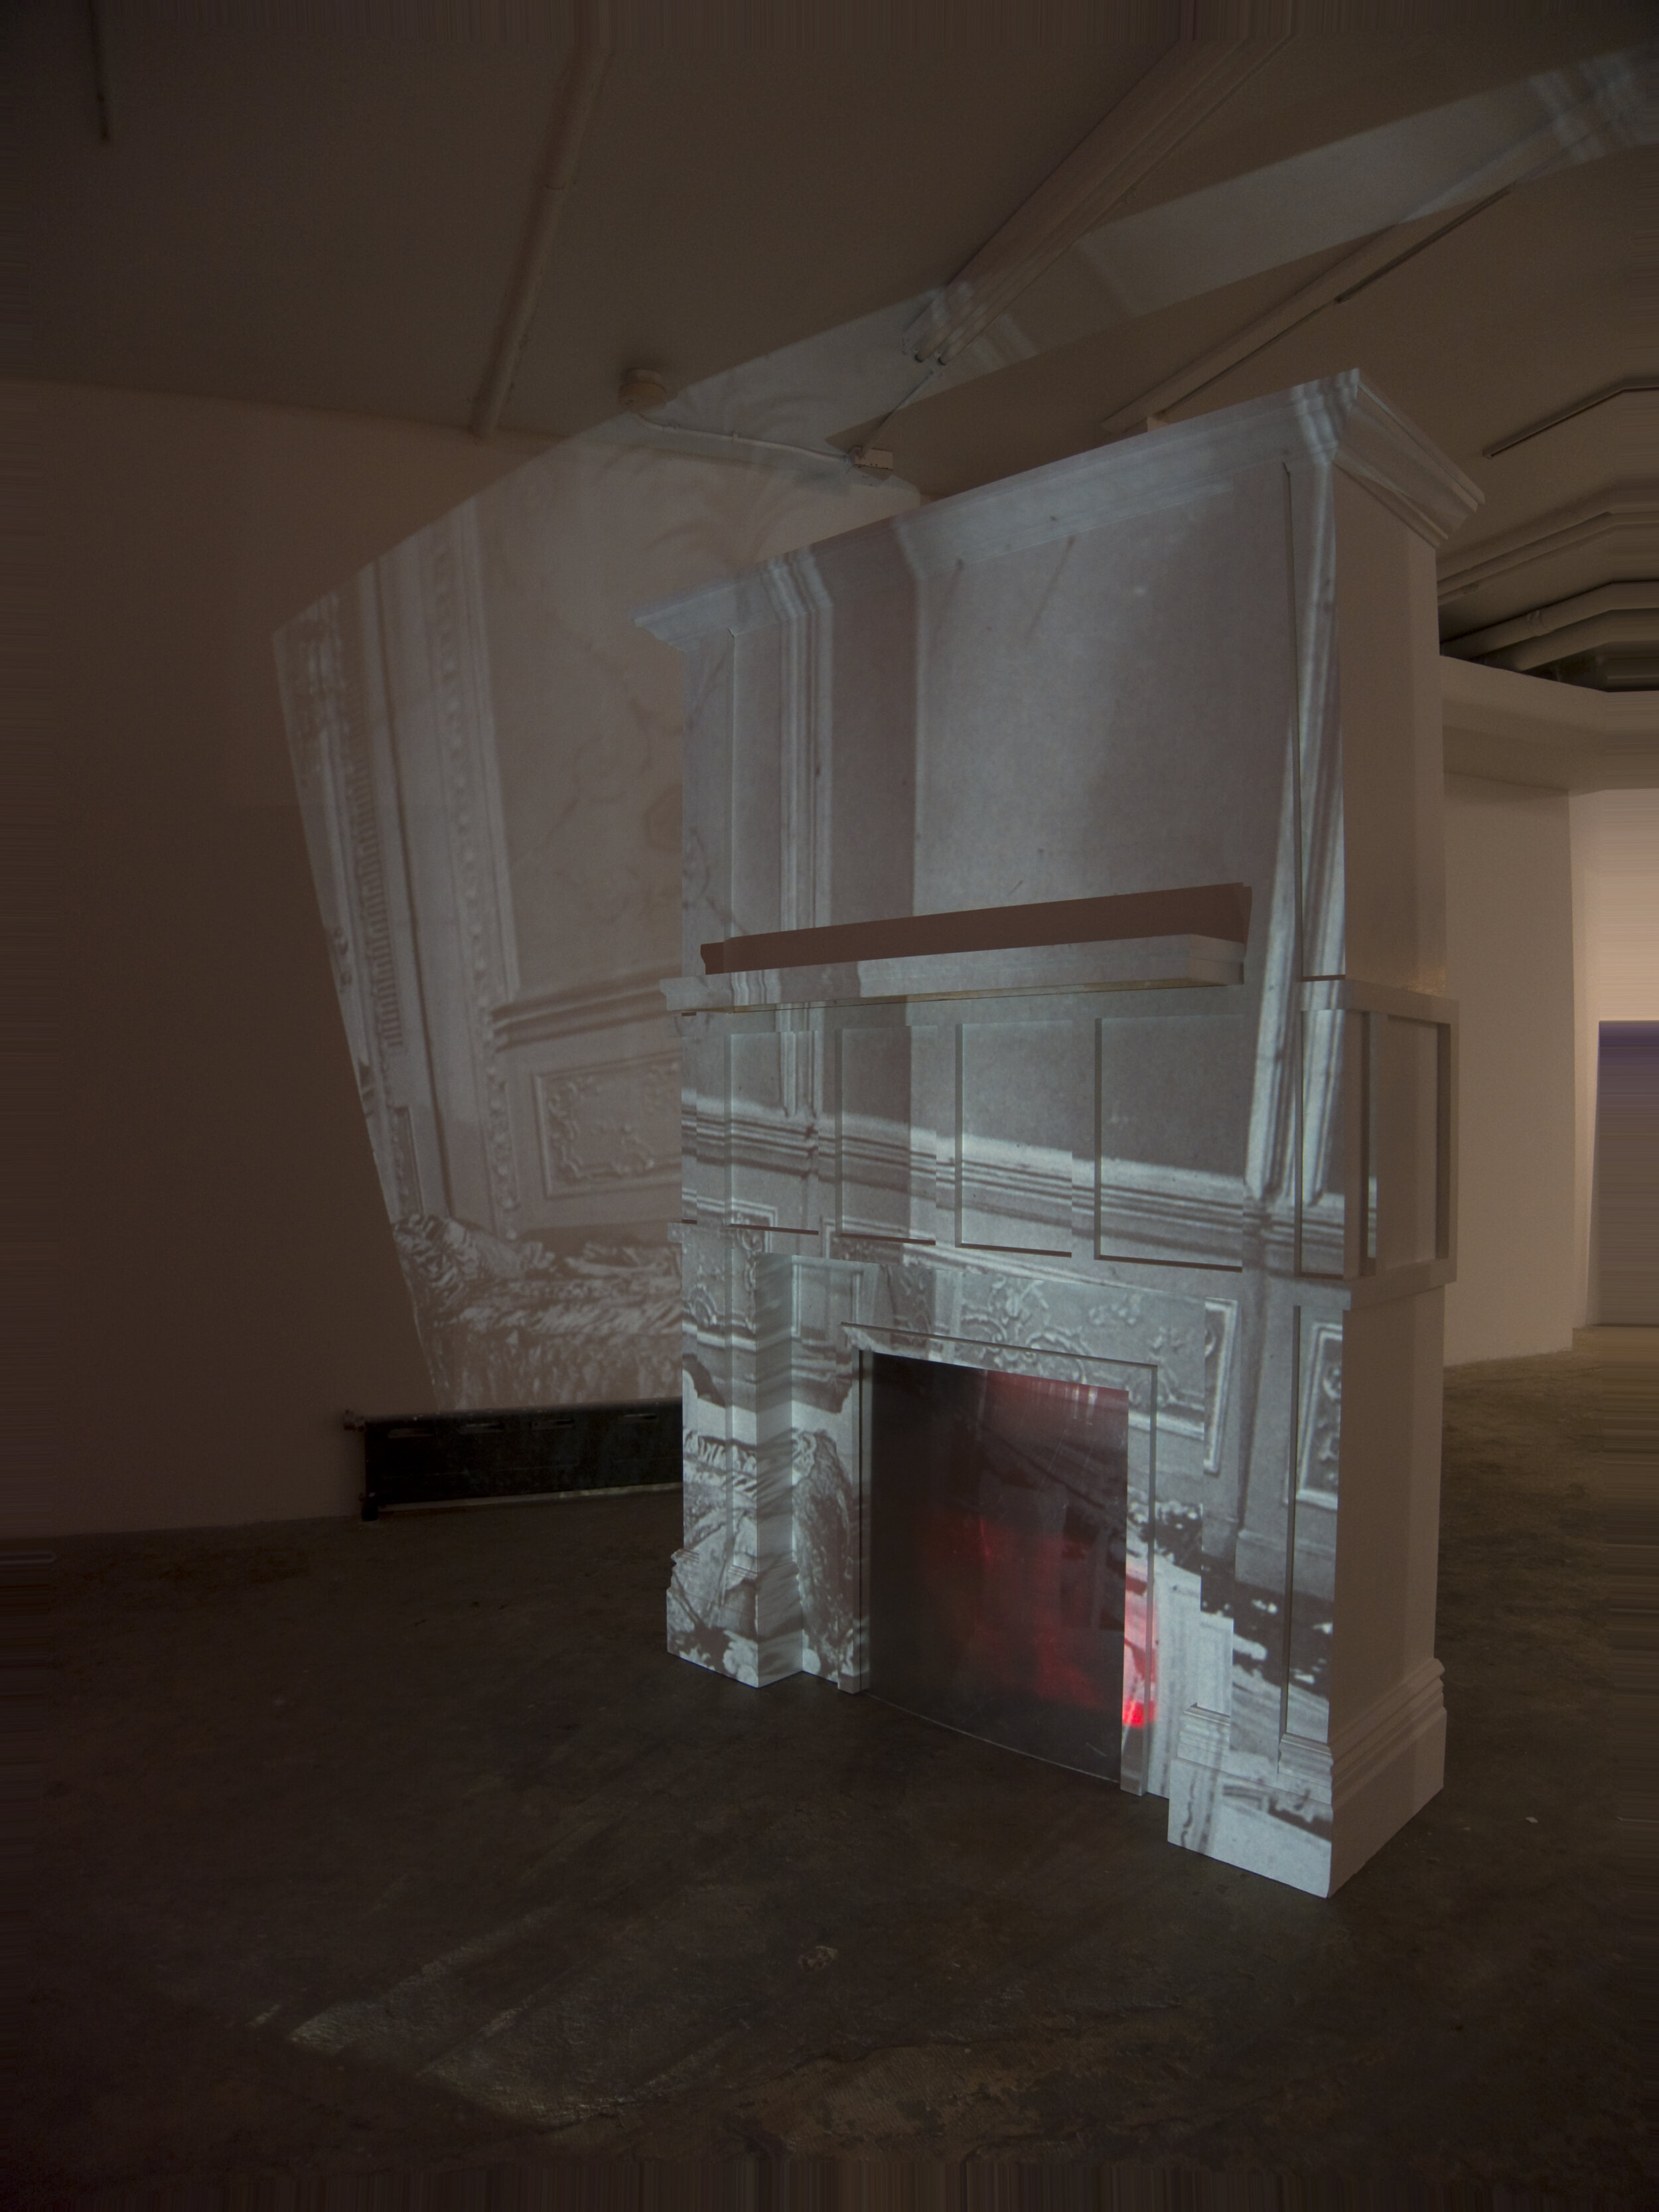 Installation image from the 2013 Valerie Piraino exhibition, Photoplay, at Cindy Rucker Gallery